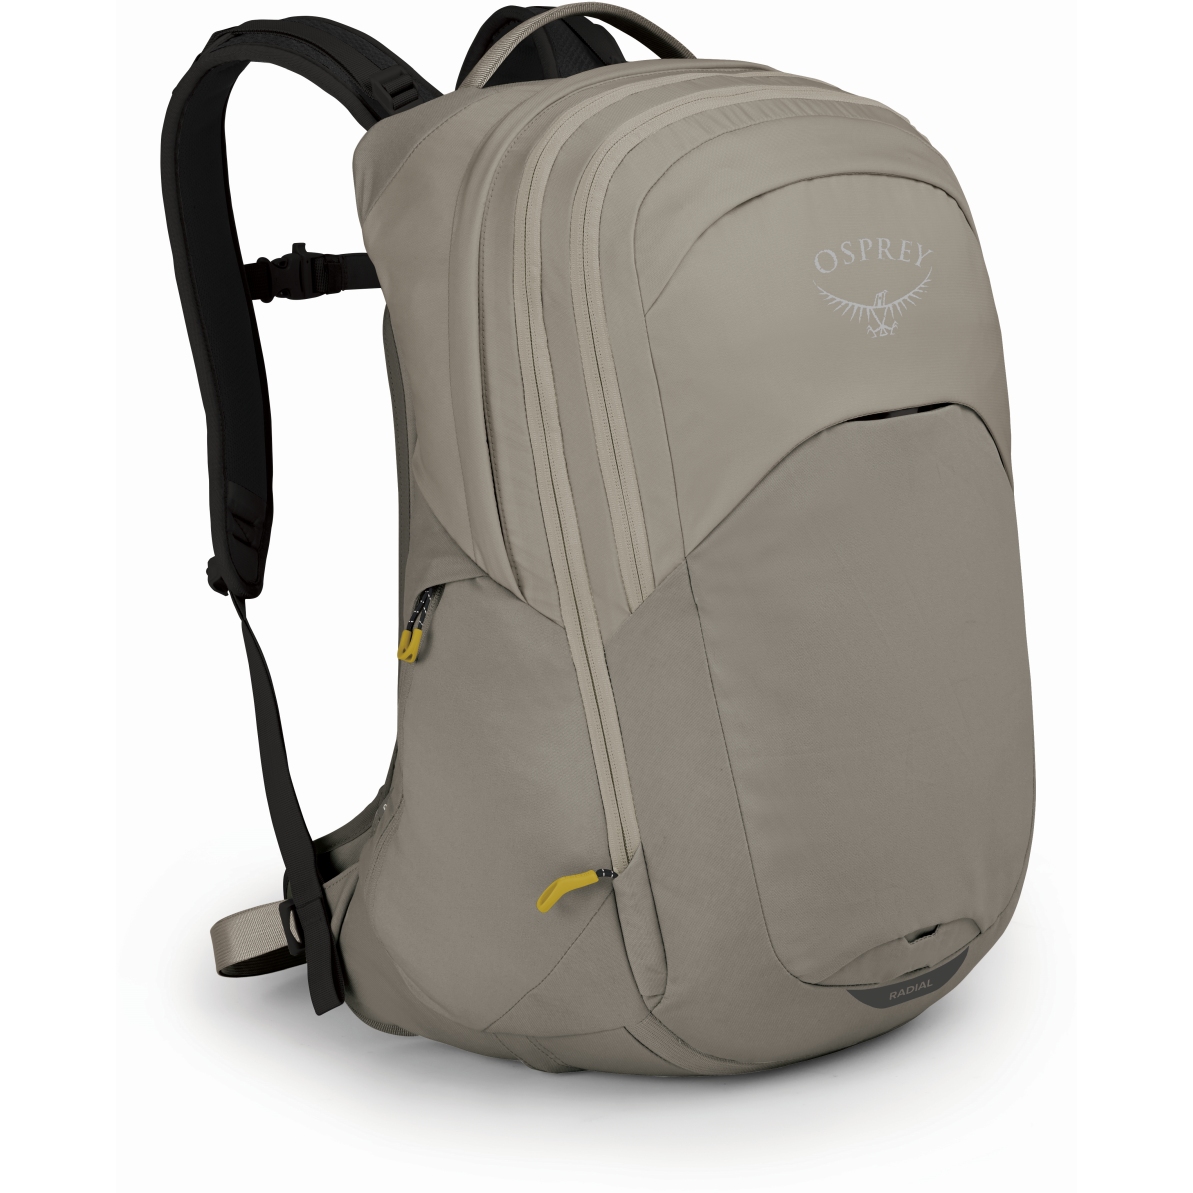 Picture of Osprey Radial 26+8 Backpack - Tan Concrete